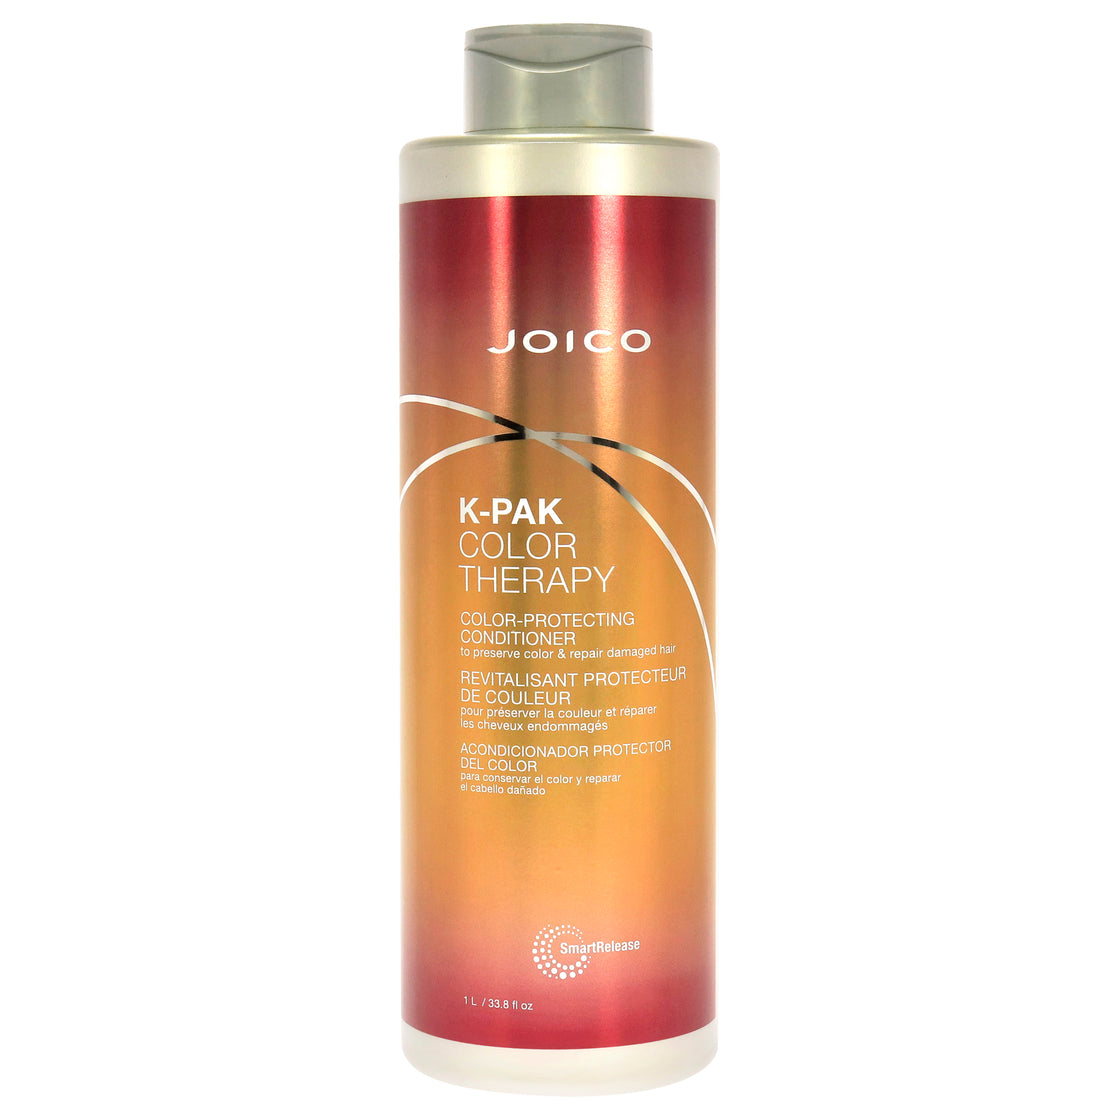 K-Pak Color Therapy Conditioner by Joico for Unisex - 33.8 oz Conditioner